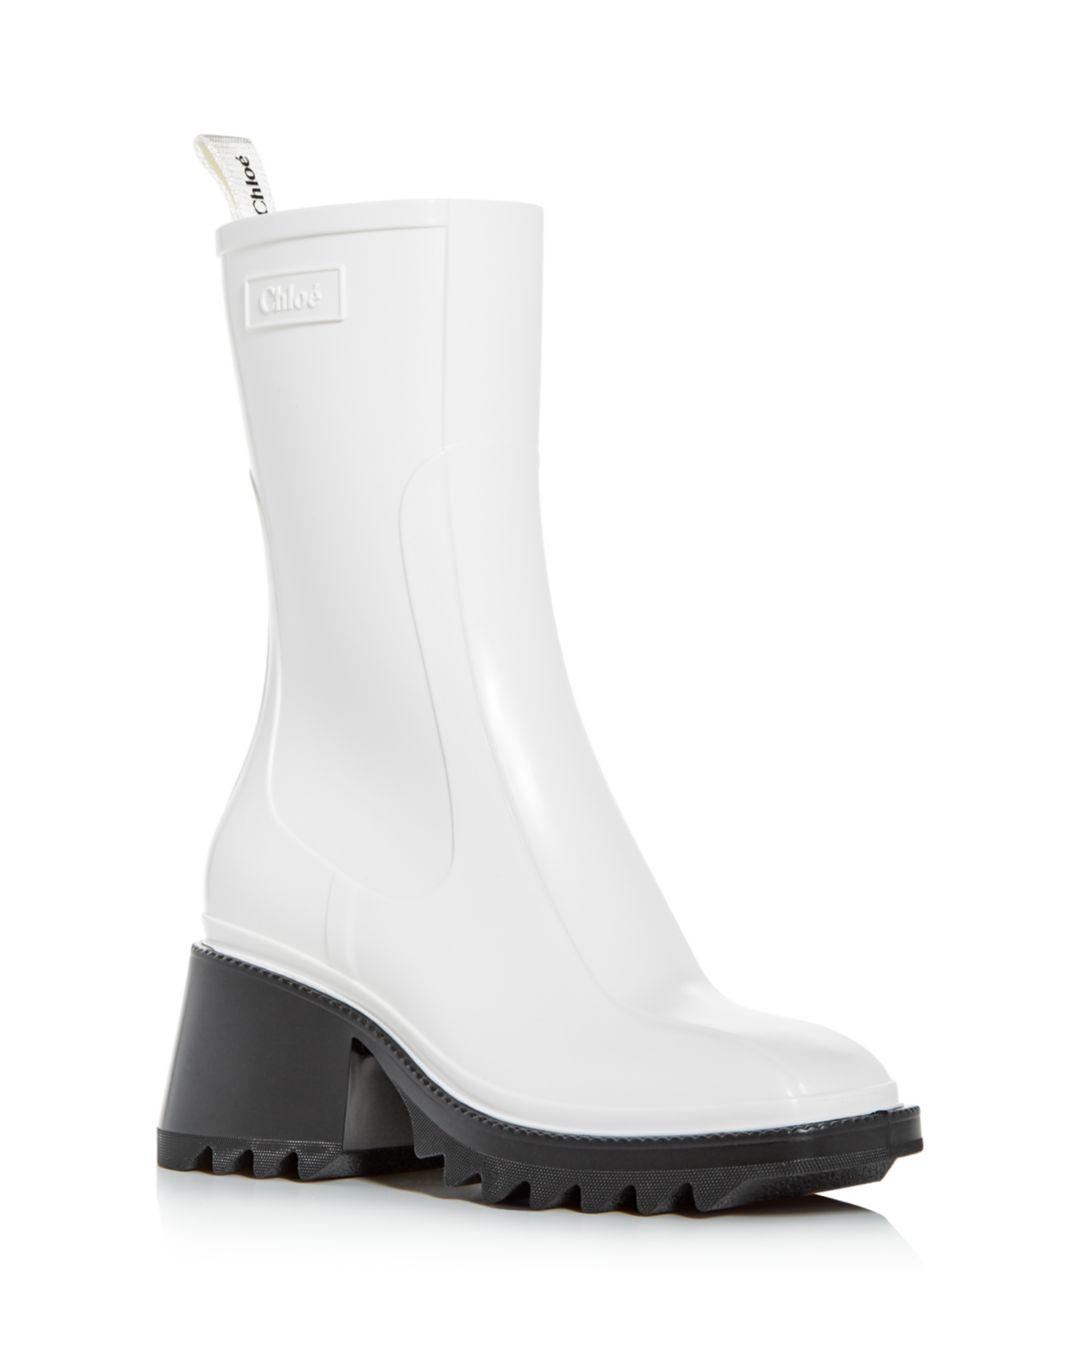 Chloé Rubber Rain Boots Betty 50 in White - Save 50% - Lyst